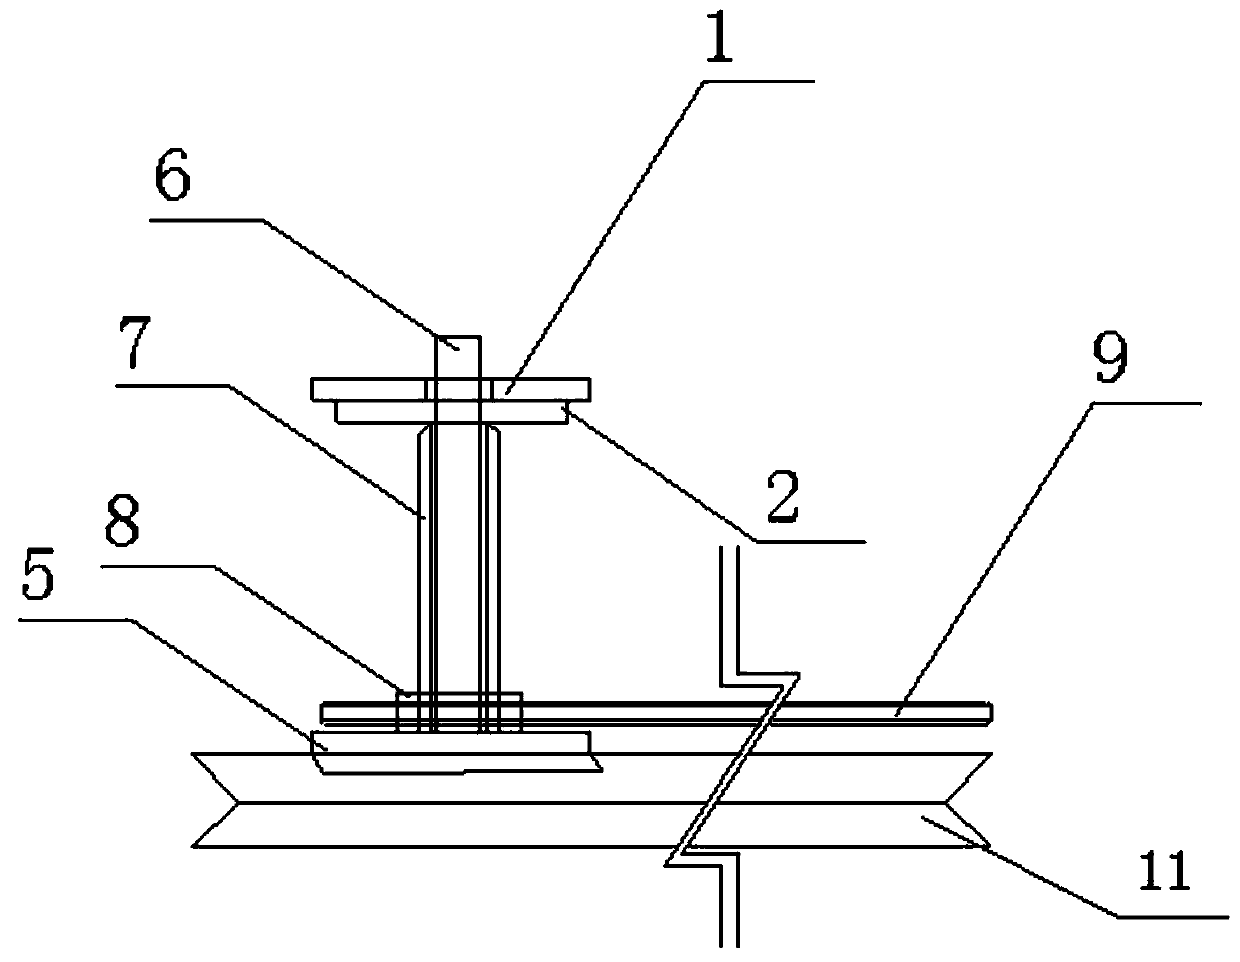 A two-dimensional similar simulation experiment device for simulating large excavation space